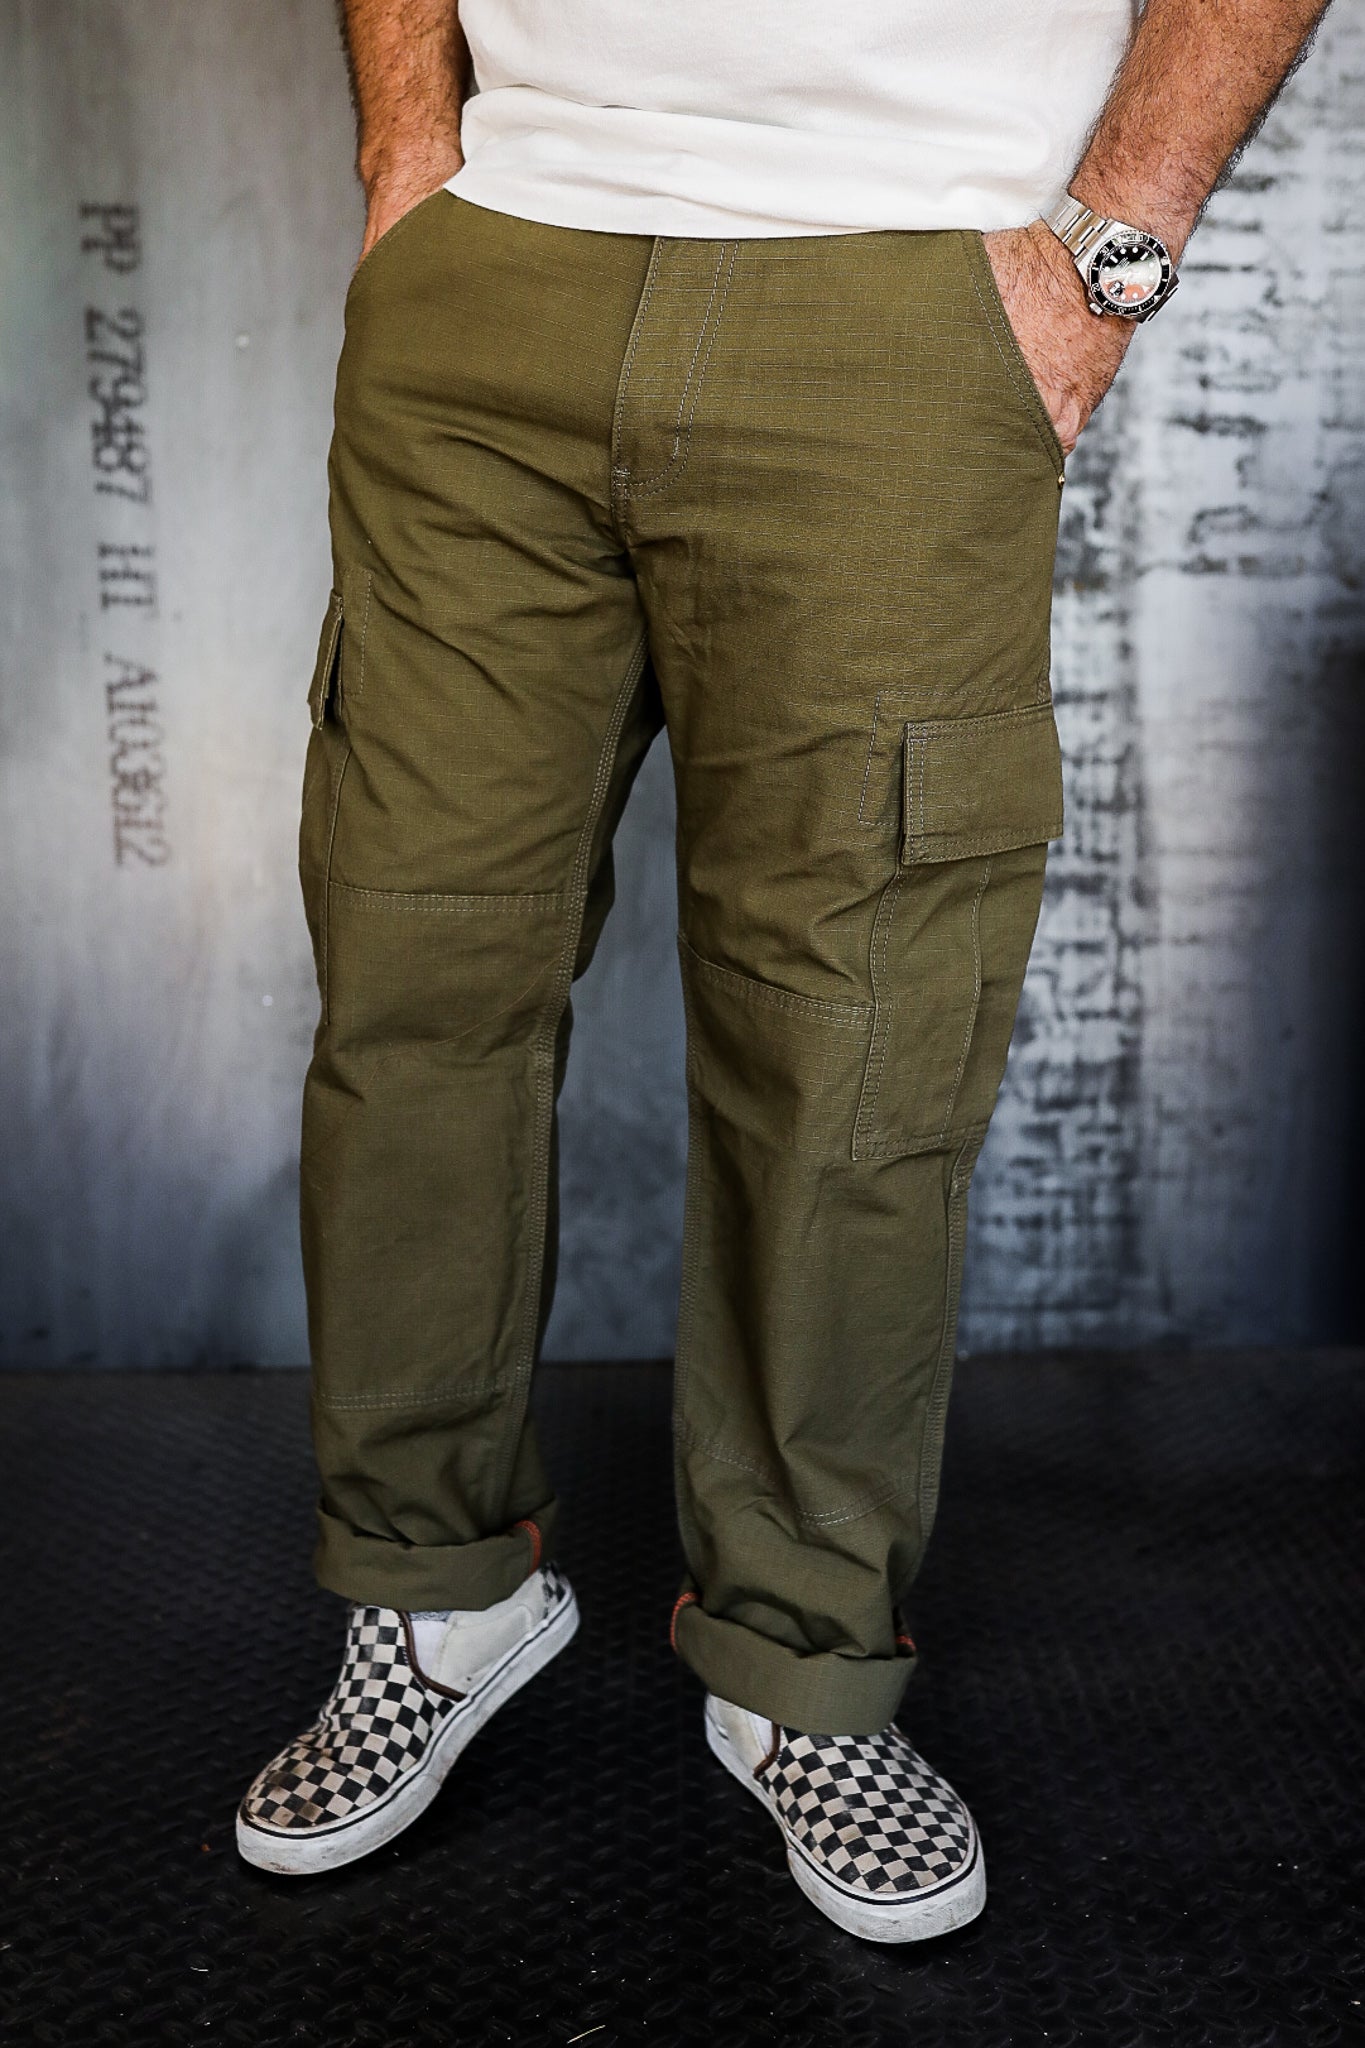 Redhead Ripstop Cargo Pants for Men - Olive Green - 32x32